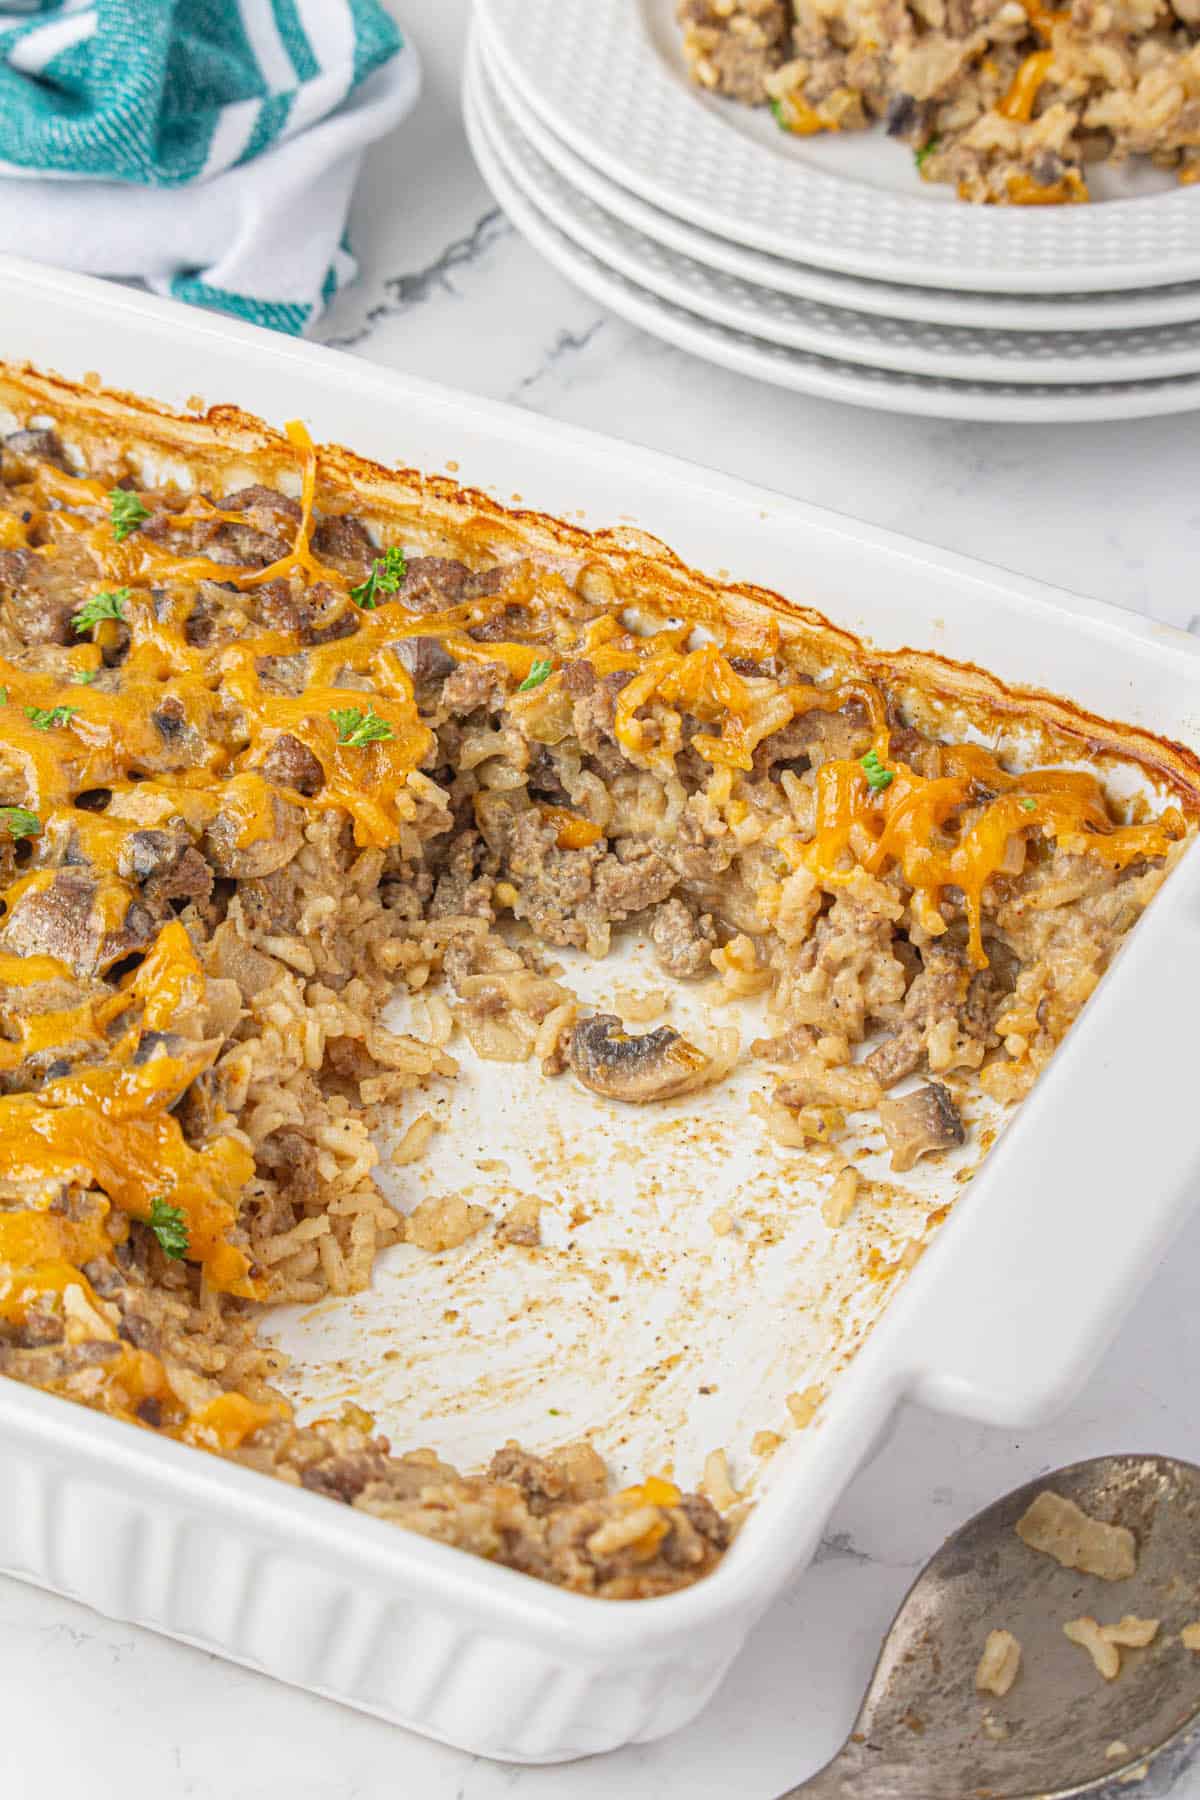 Beef and rice casserole in a baking dish. There have been several servings removed.